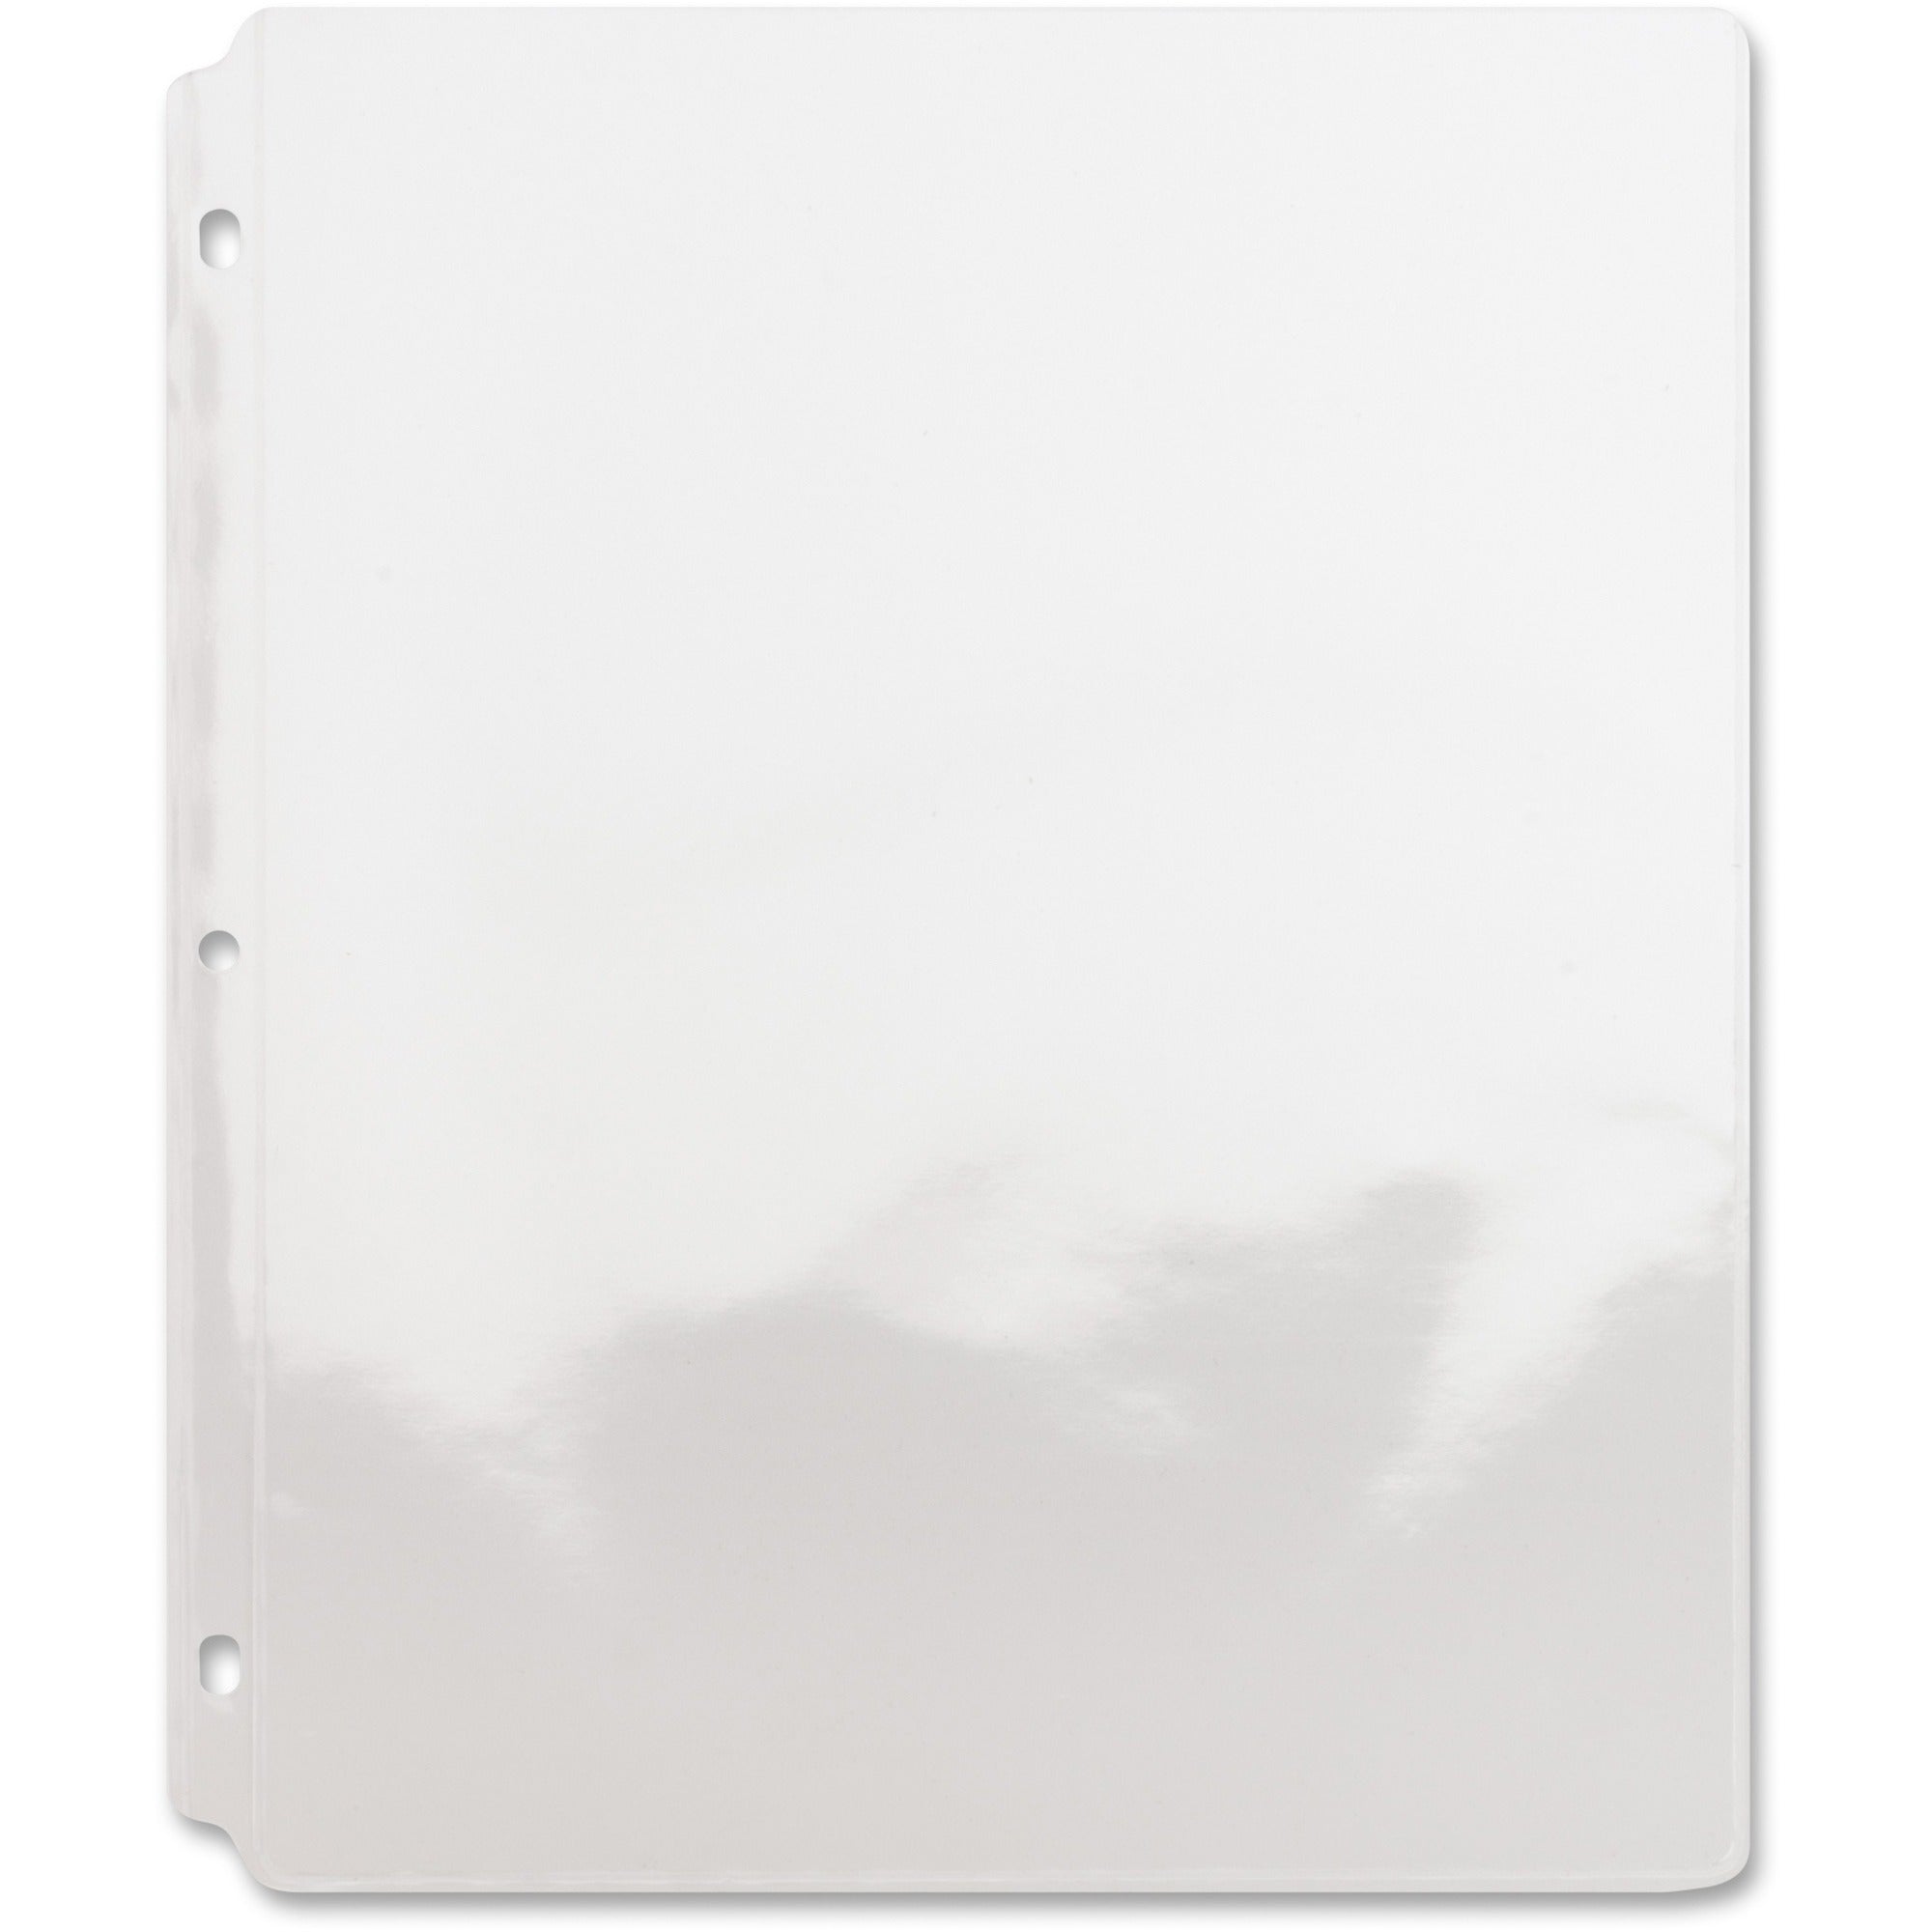 Sparco Top-Loading Vinyl Sheet Protectors - For Letter 8 1/2" x 11" Sheet - Clear - Vinyl - 50 / Box - 